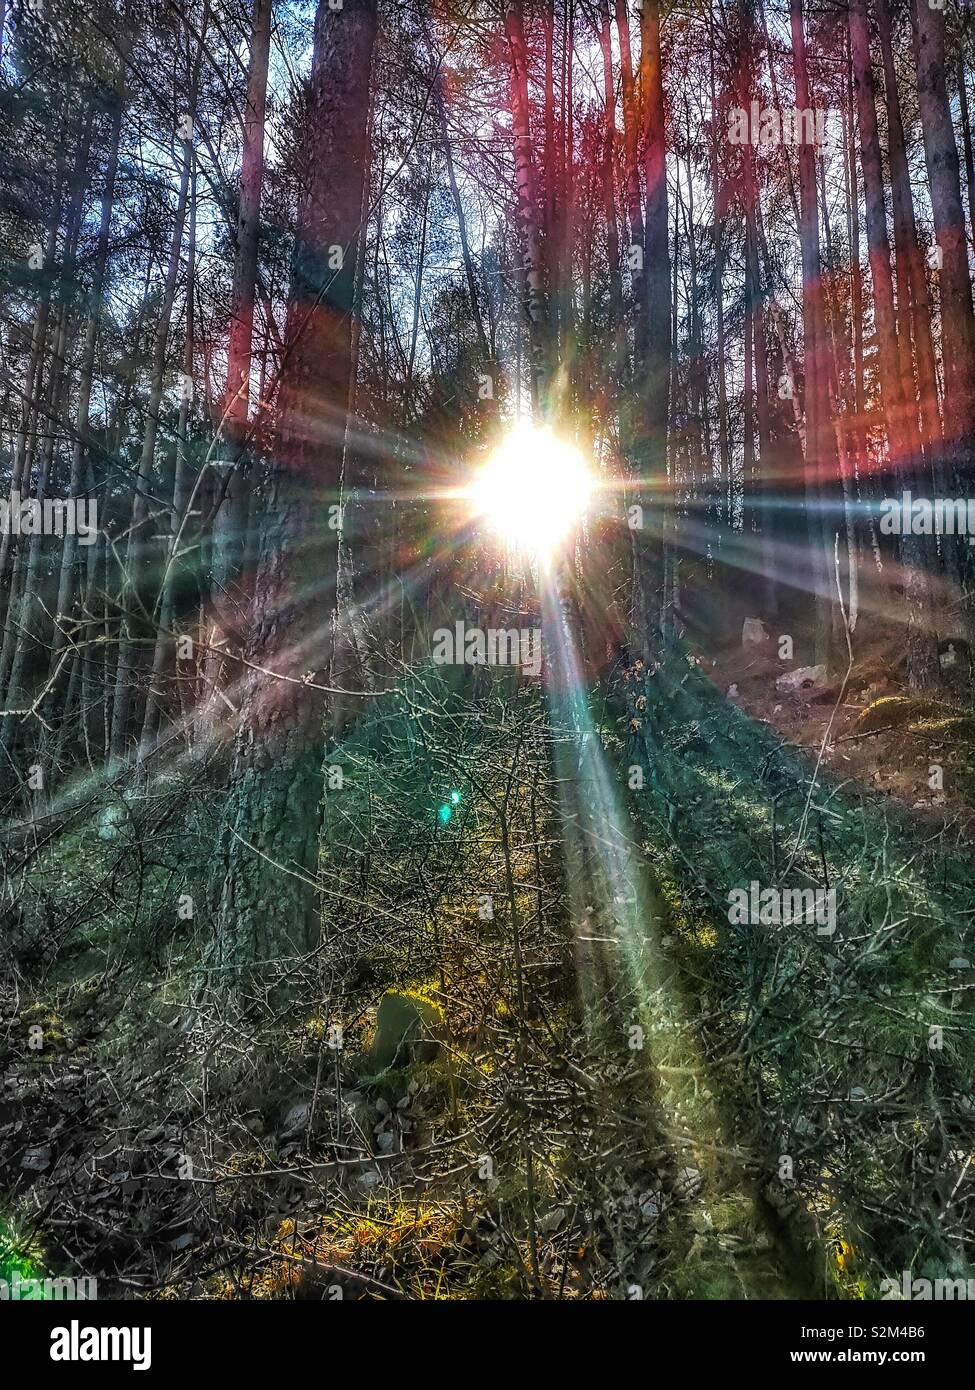 Suns rays streaming through trees deep in forest, Sweden, Scandinavia Stock Photo